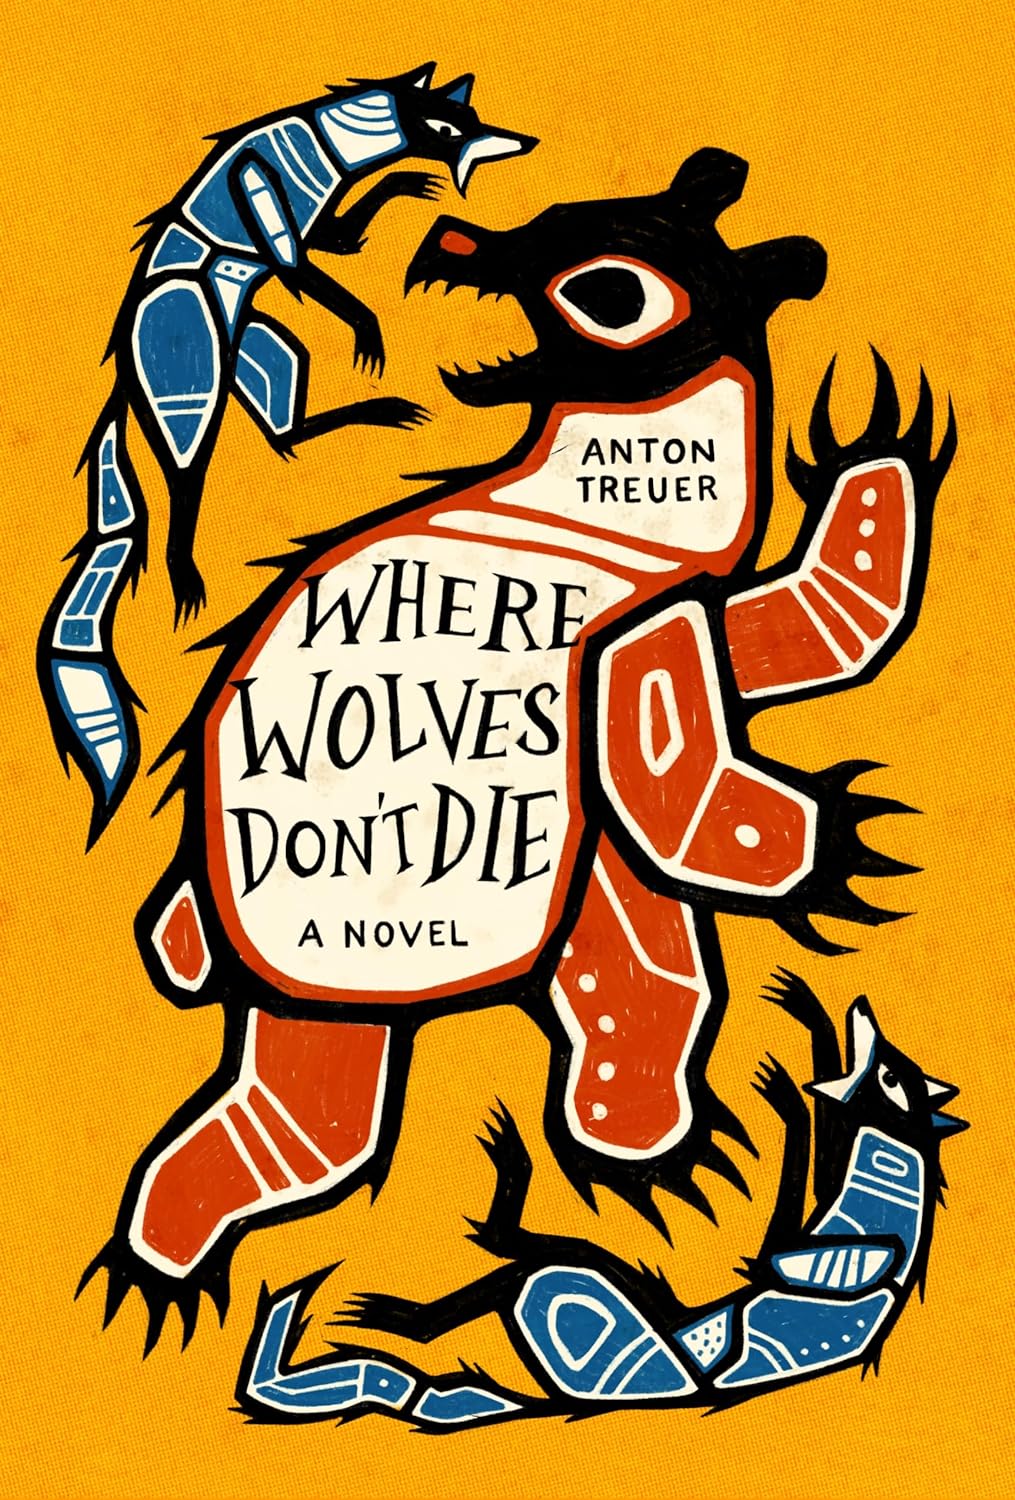 Where Wolves Don't Die by Anton Treuer